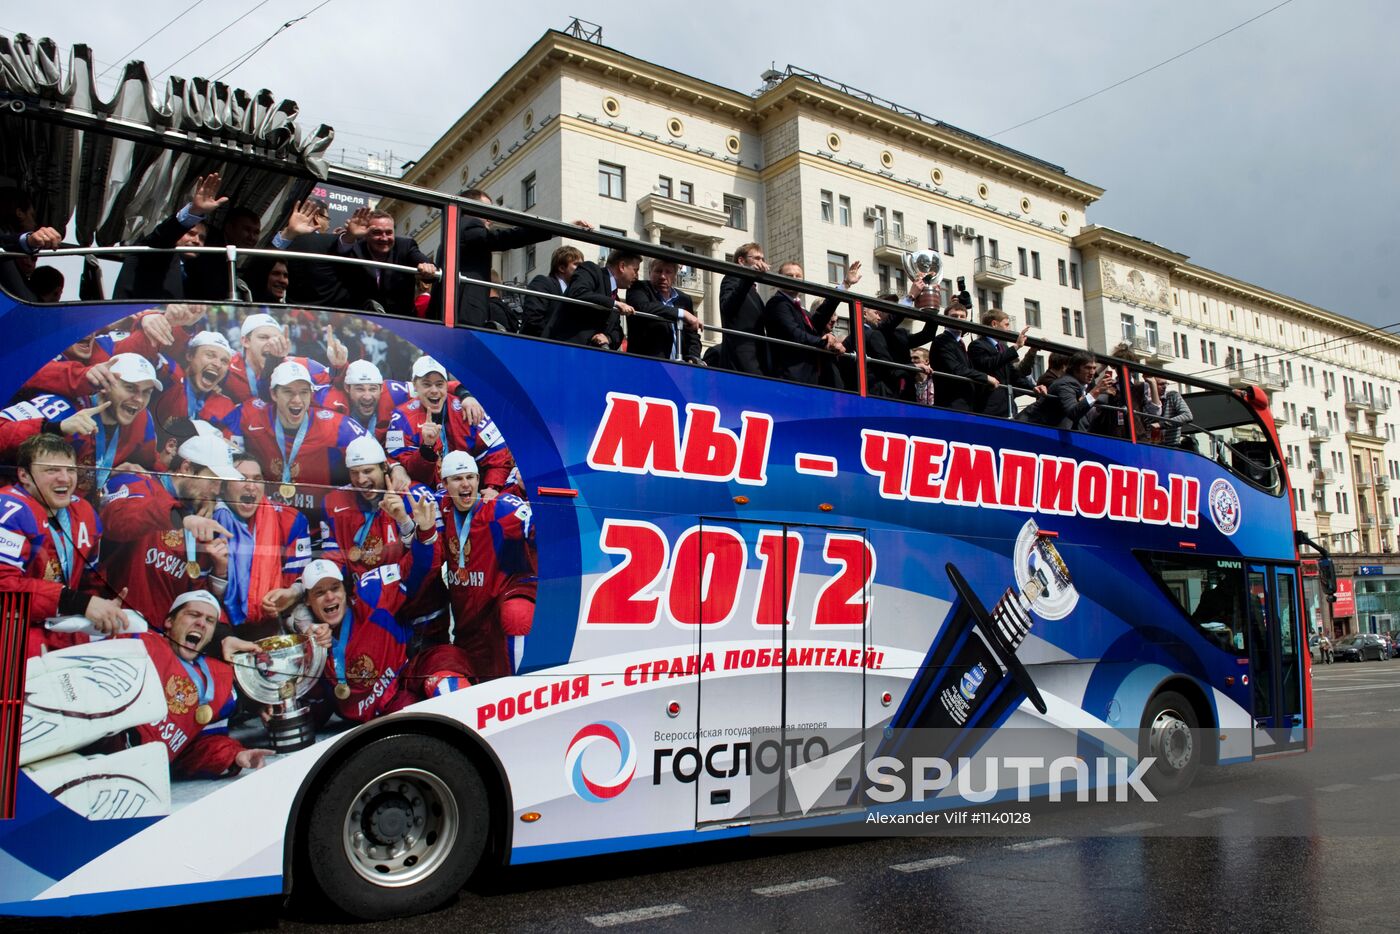 Russian national hockey team celebration parade in Moscow